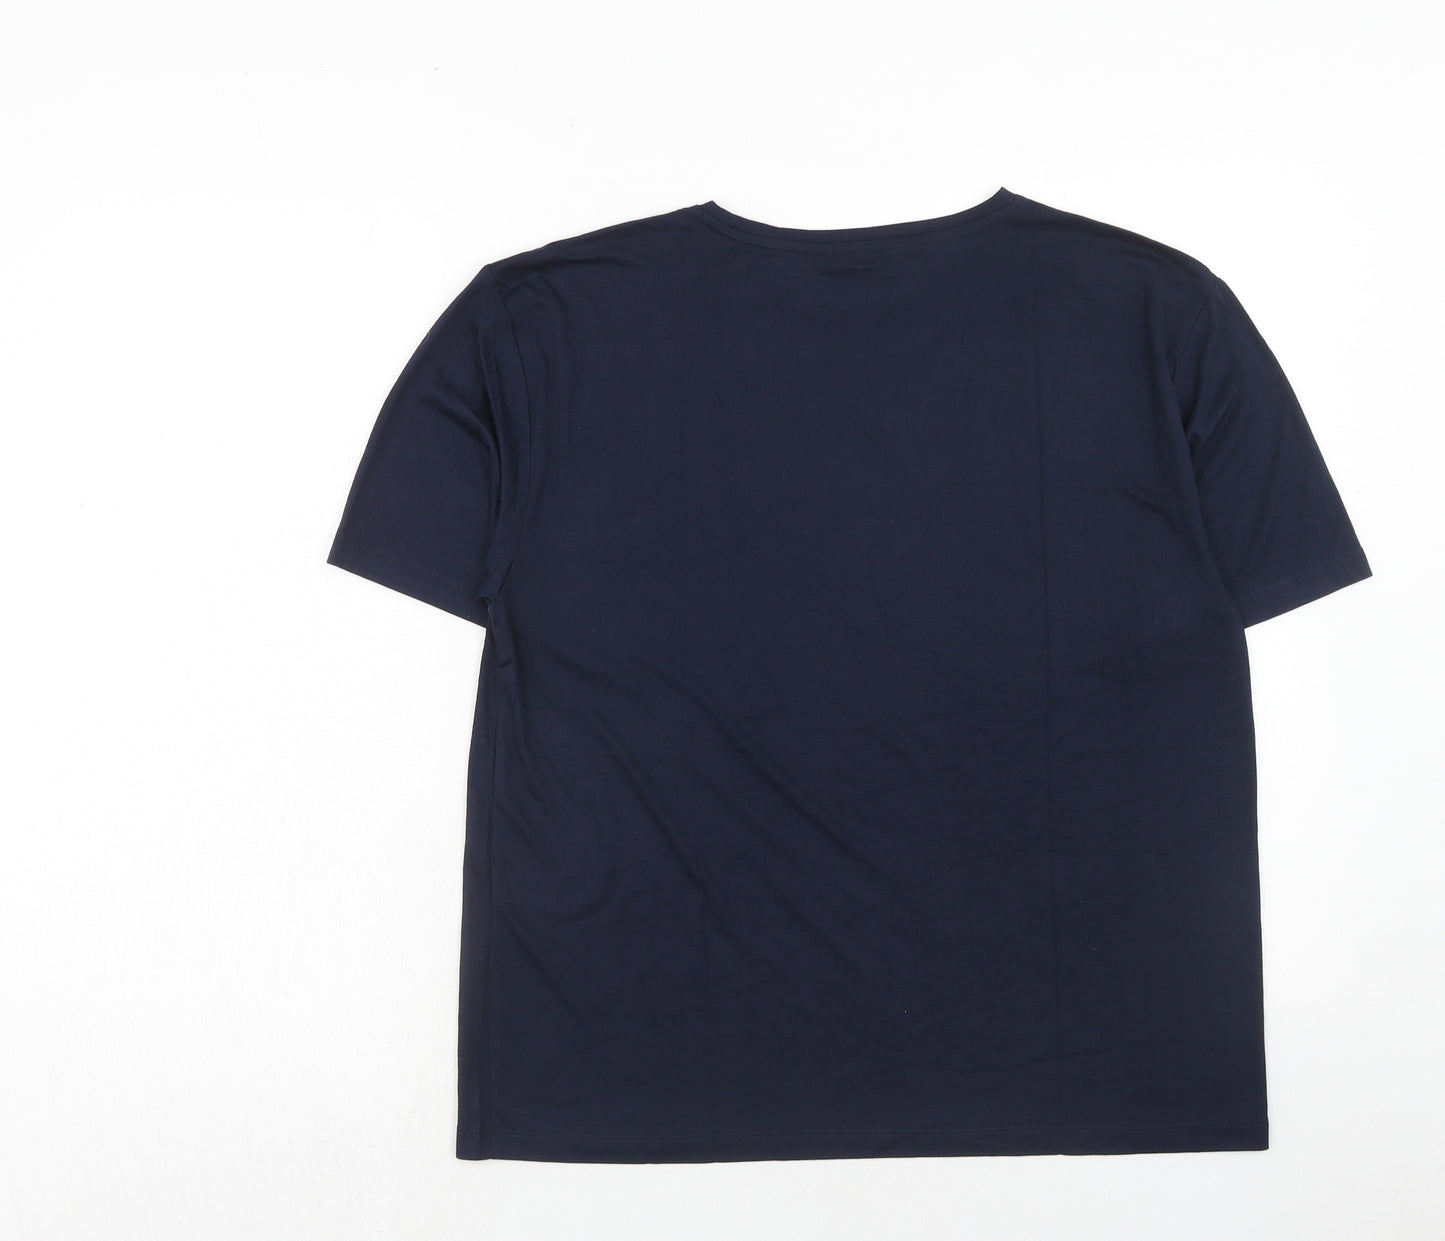 Marks and Spencer Womens Blue Polyester Basic T-Shirt Size 12 Crew Neck